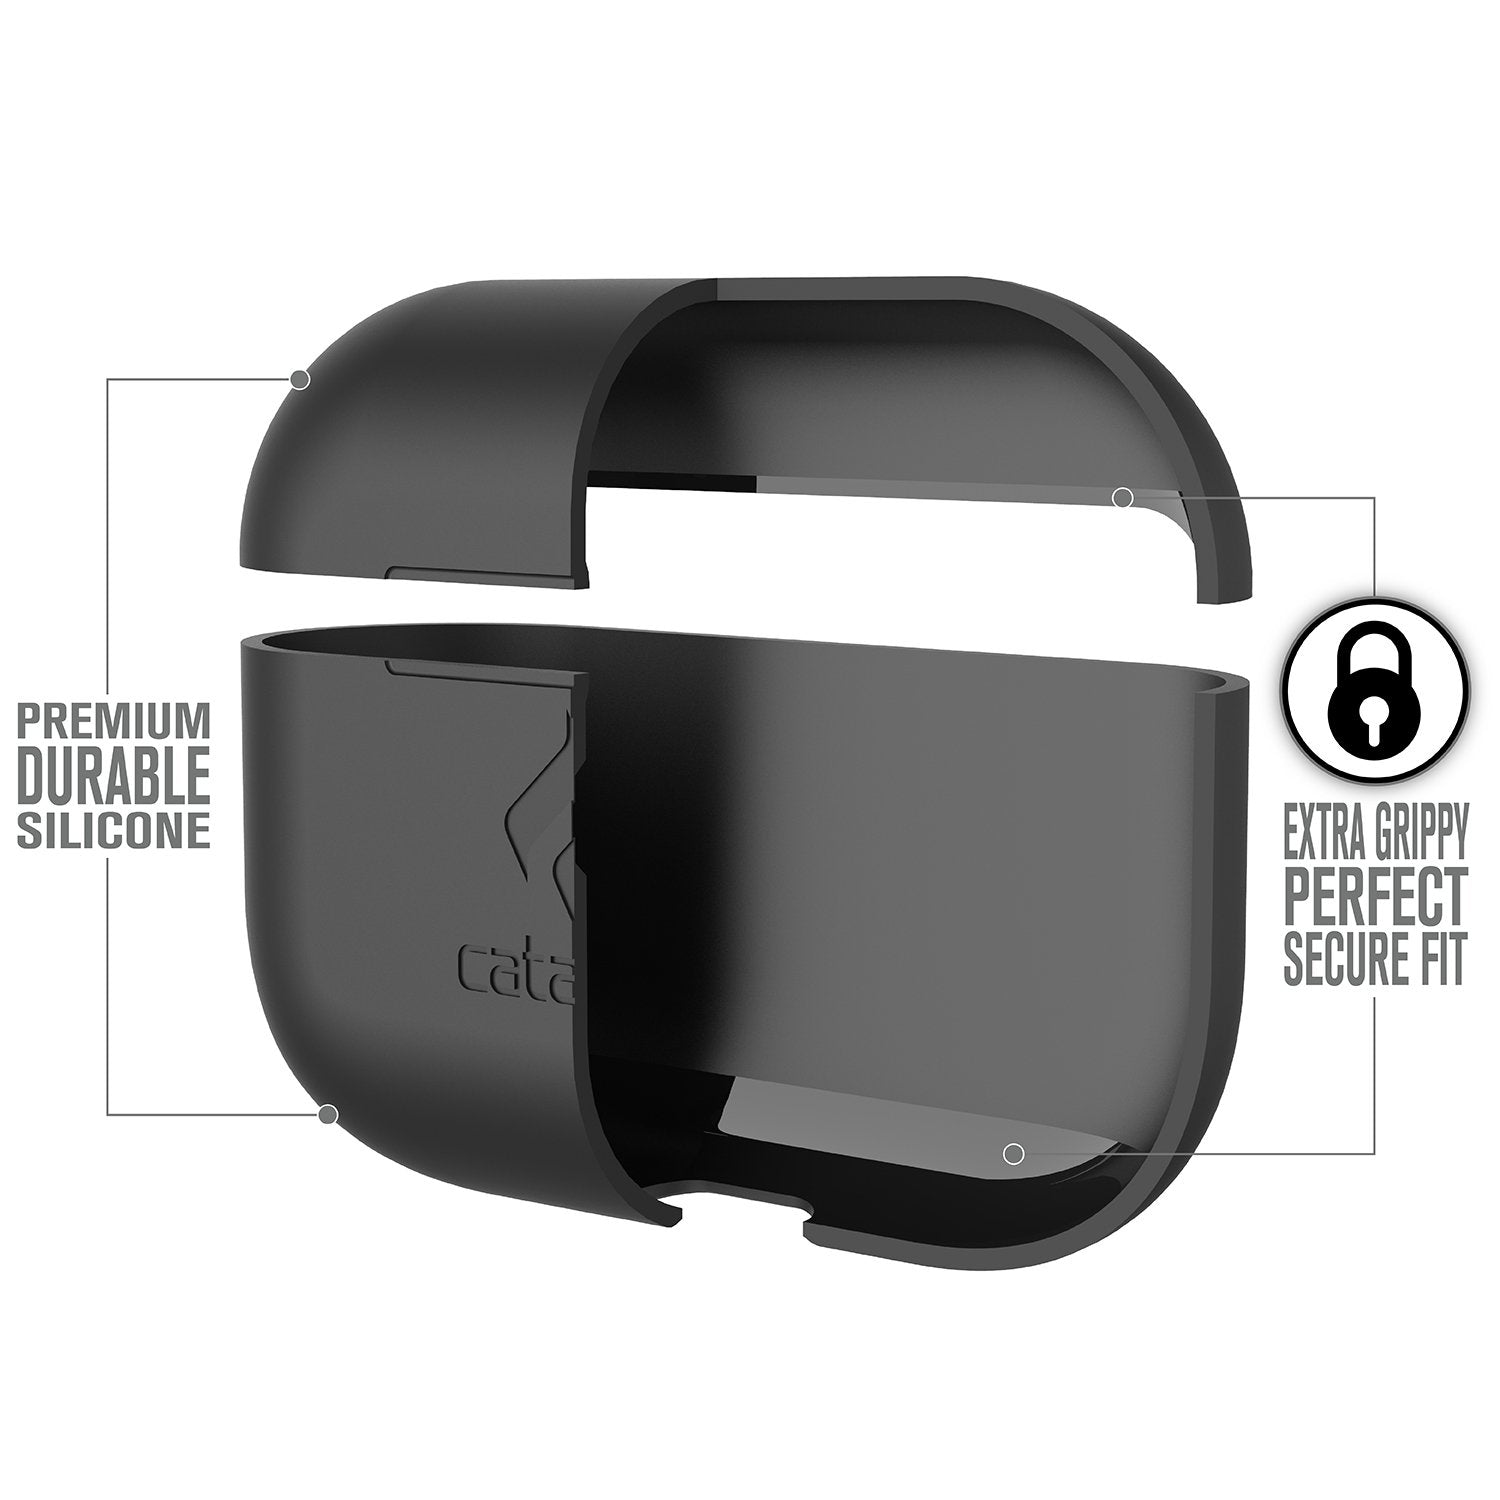 Catalyst airpods pro gen 2/1 slim case showing the case features in an stealth black colorway text reads premium durable silicone extra grippy perfect secure fit